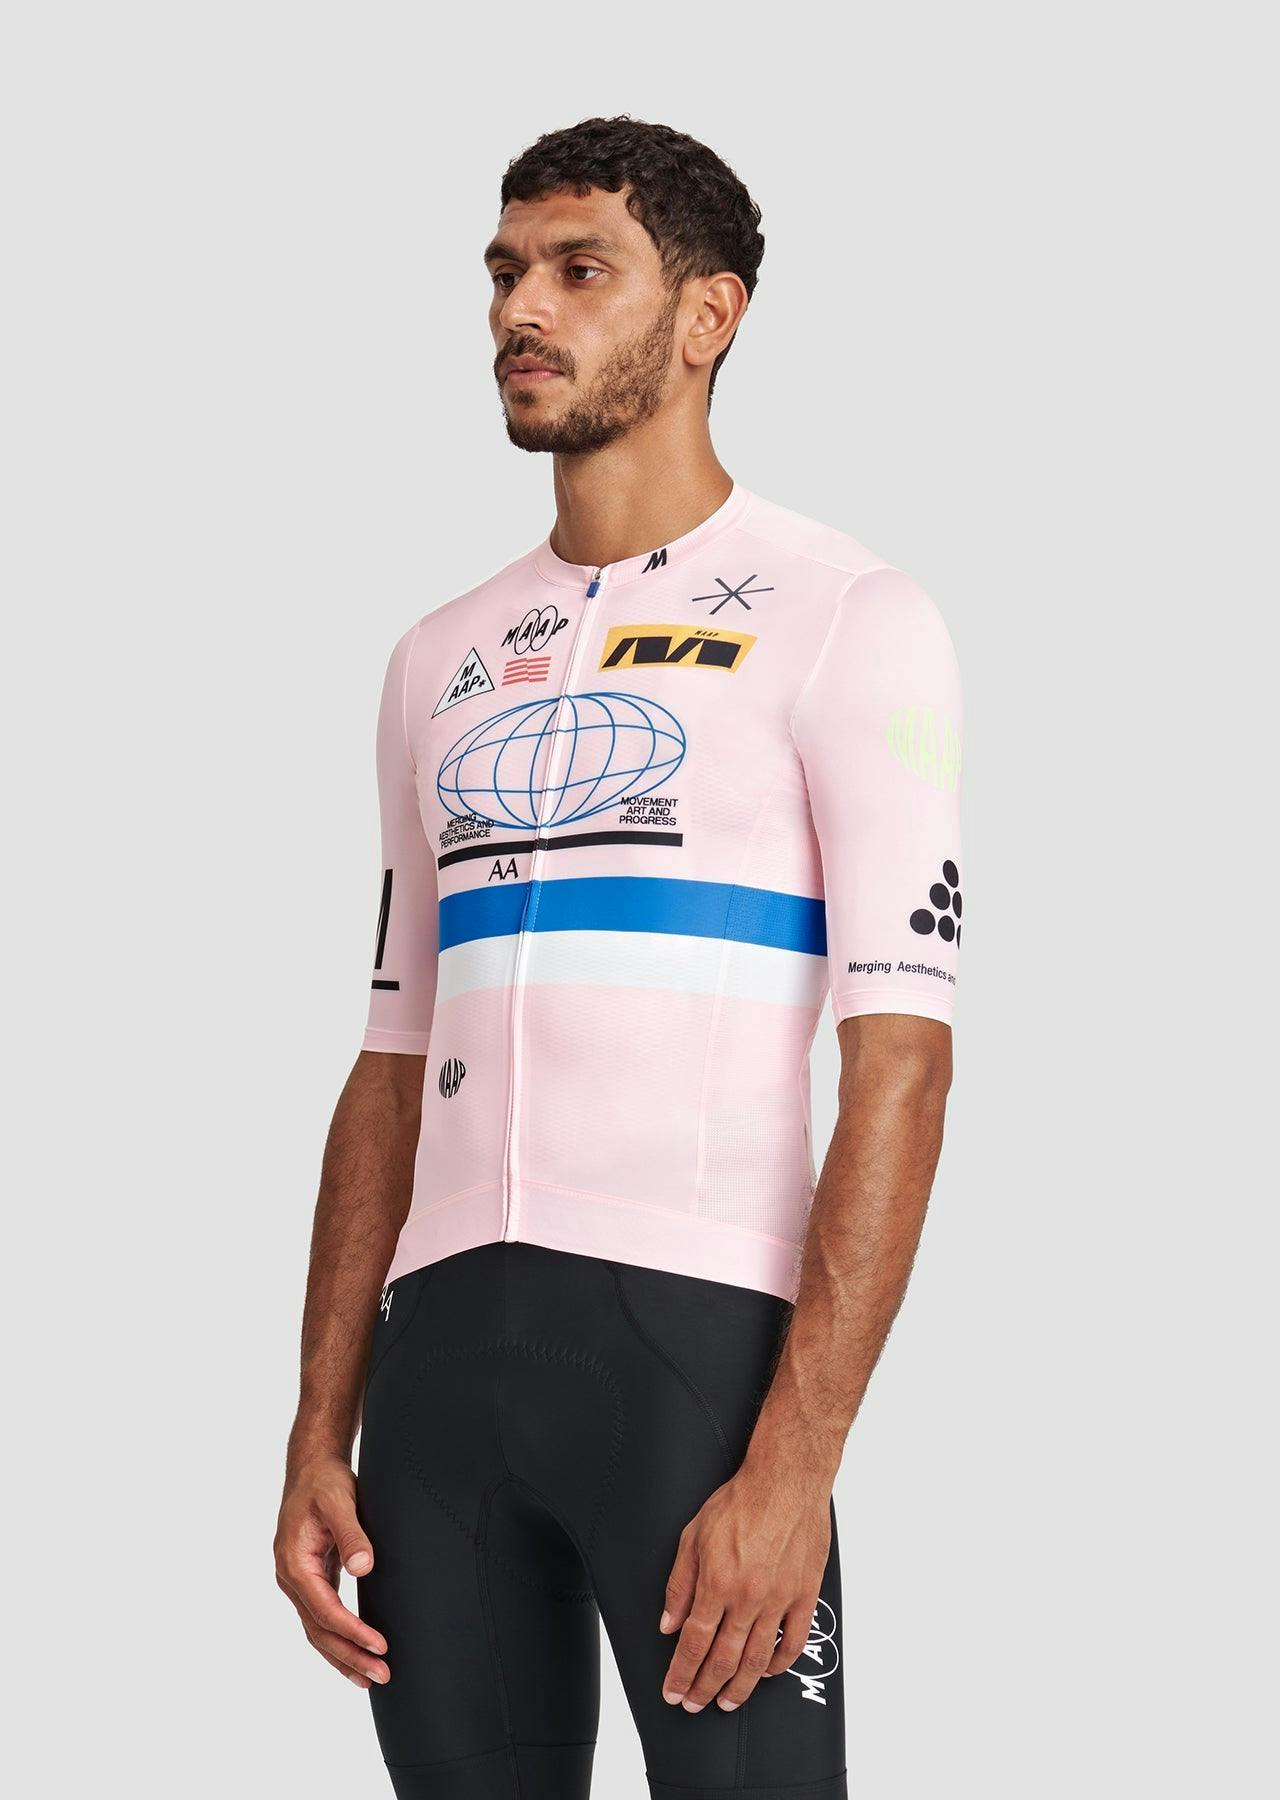 Axis Pro Jersey